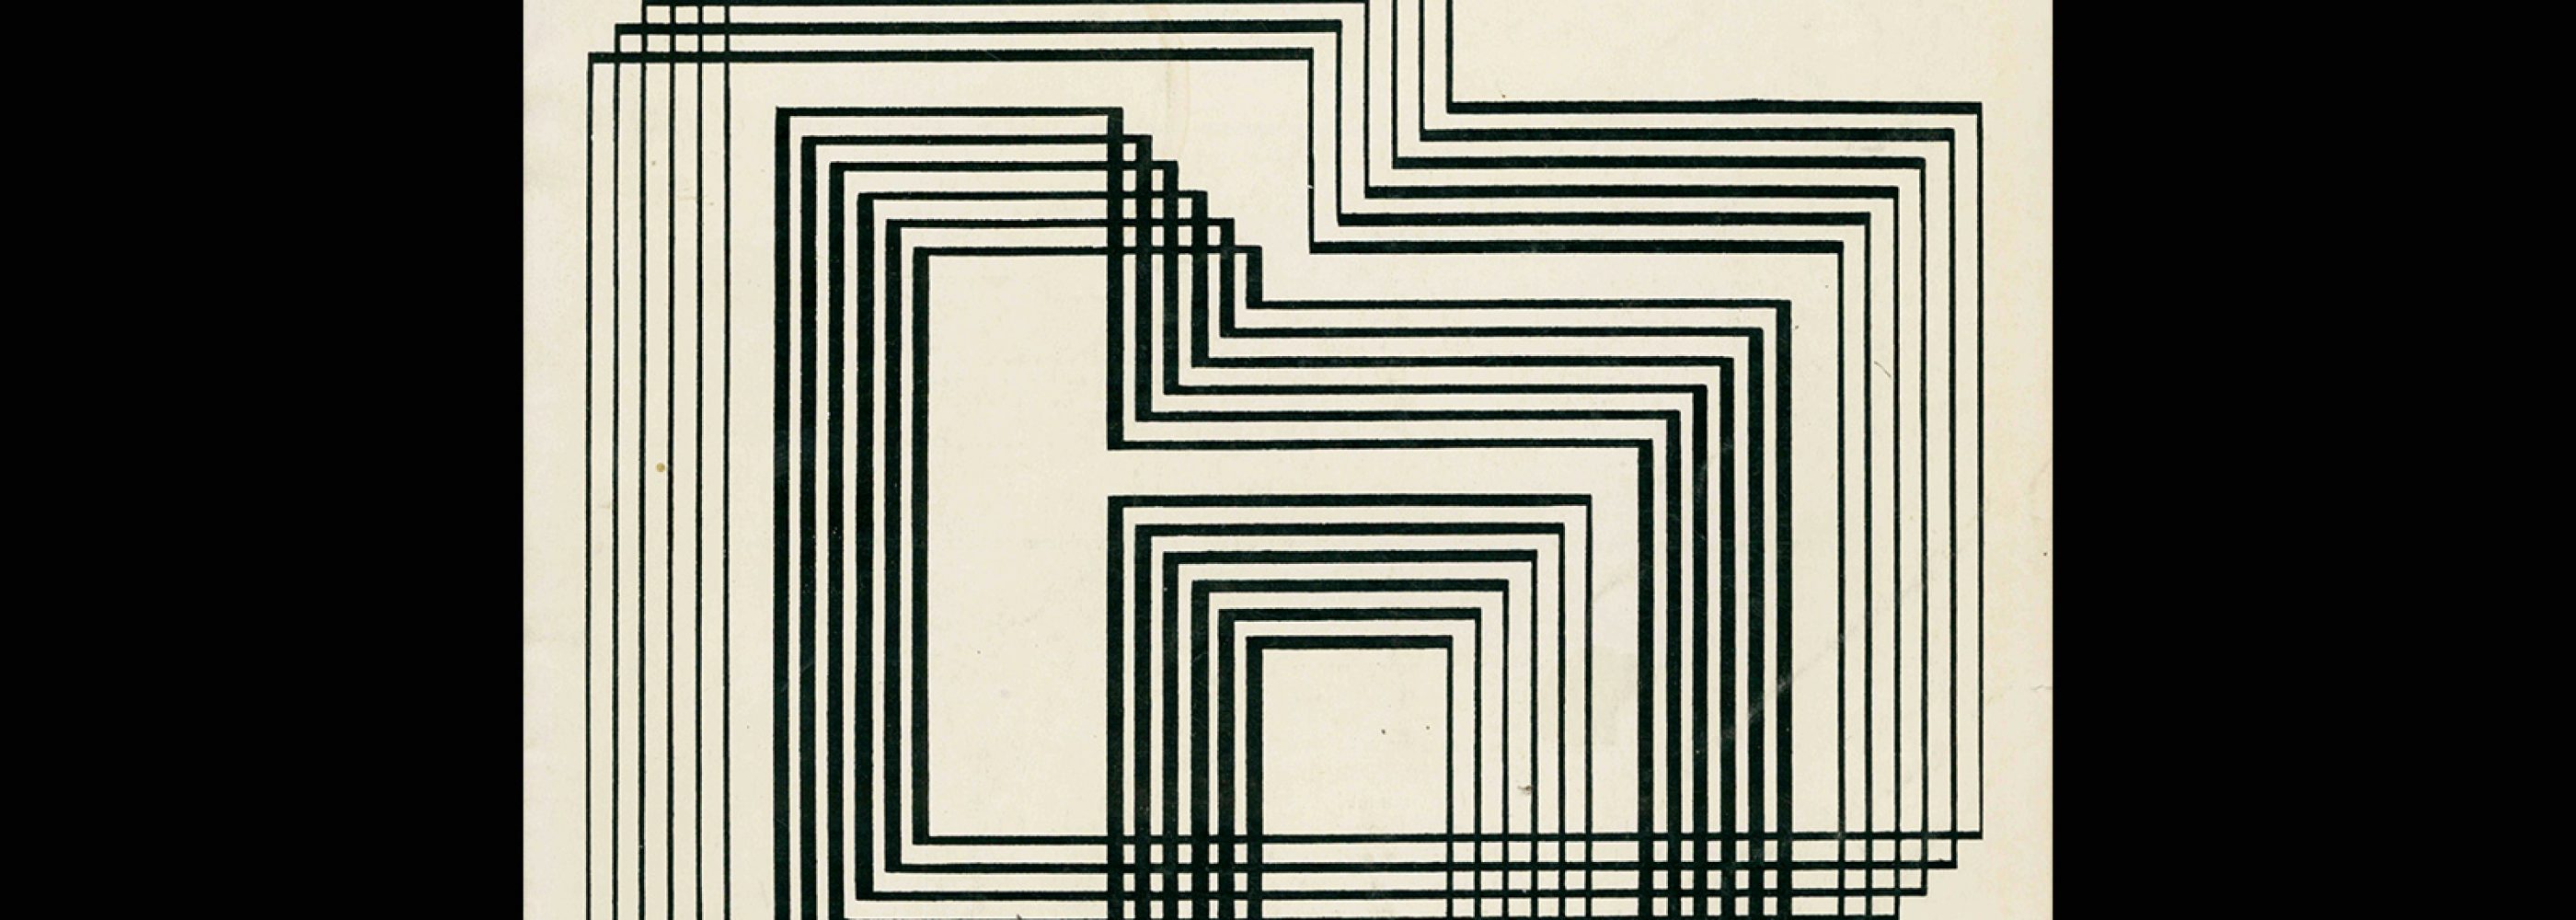 Architectural Design, June 1967. Cover image by Josef Albers